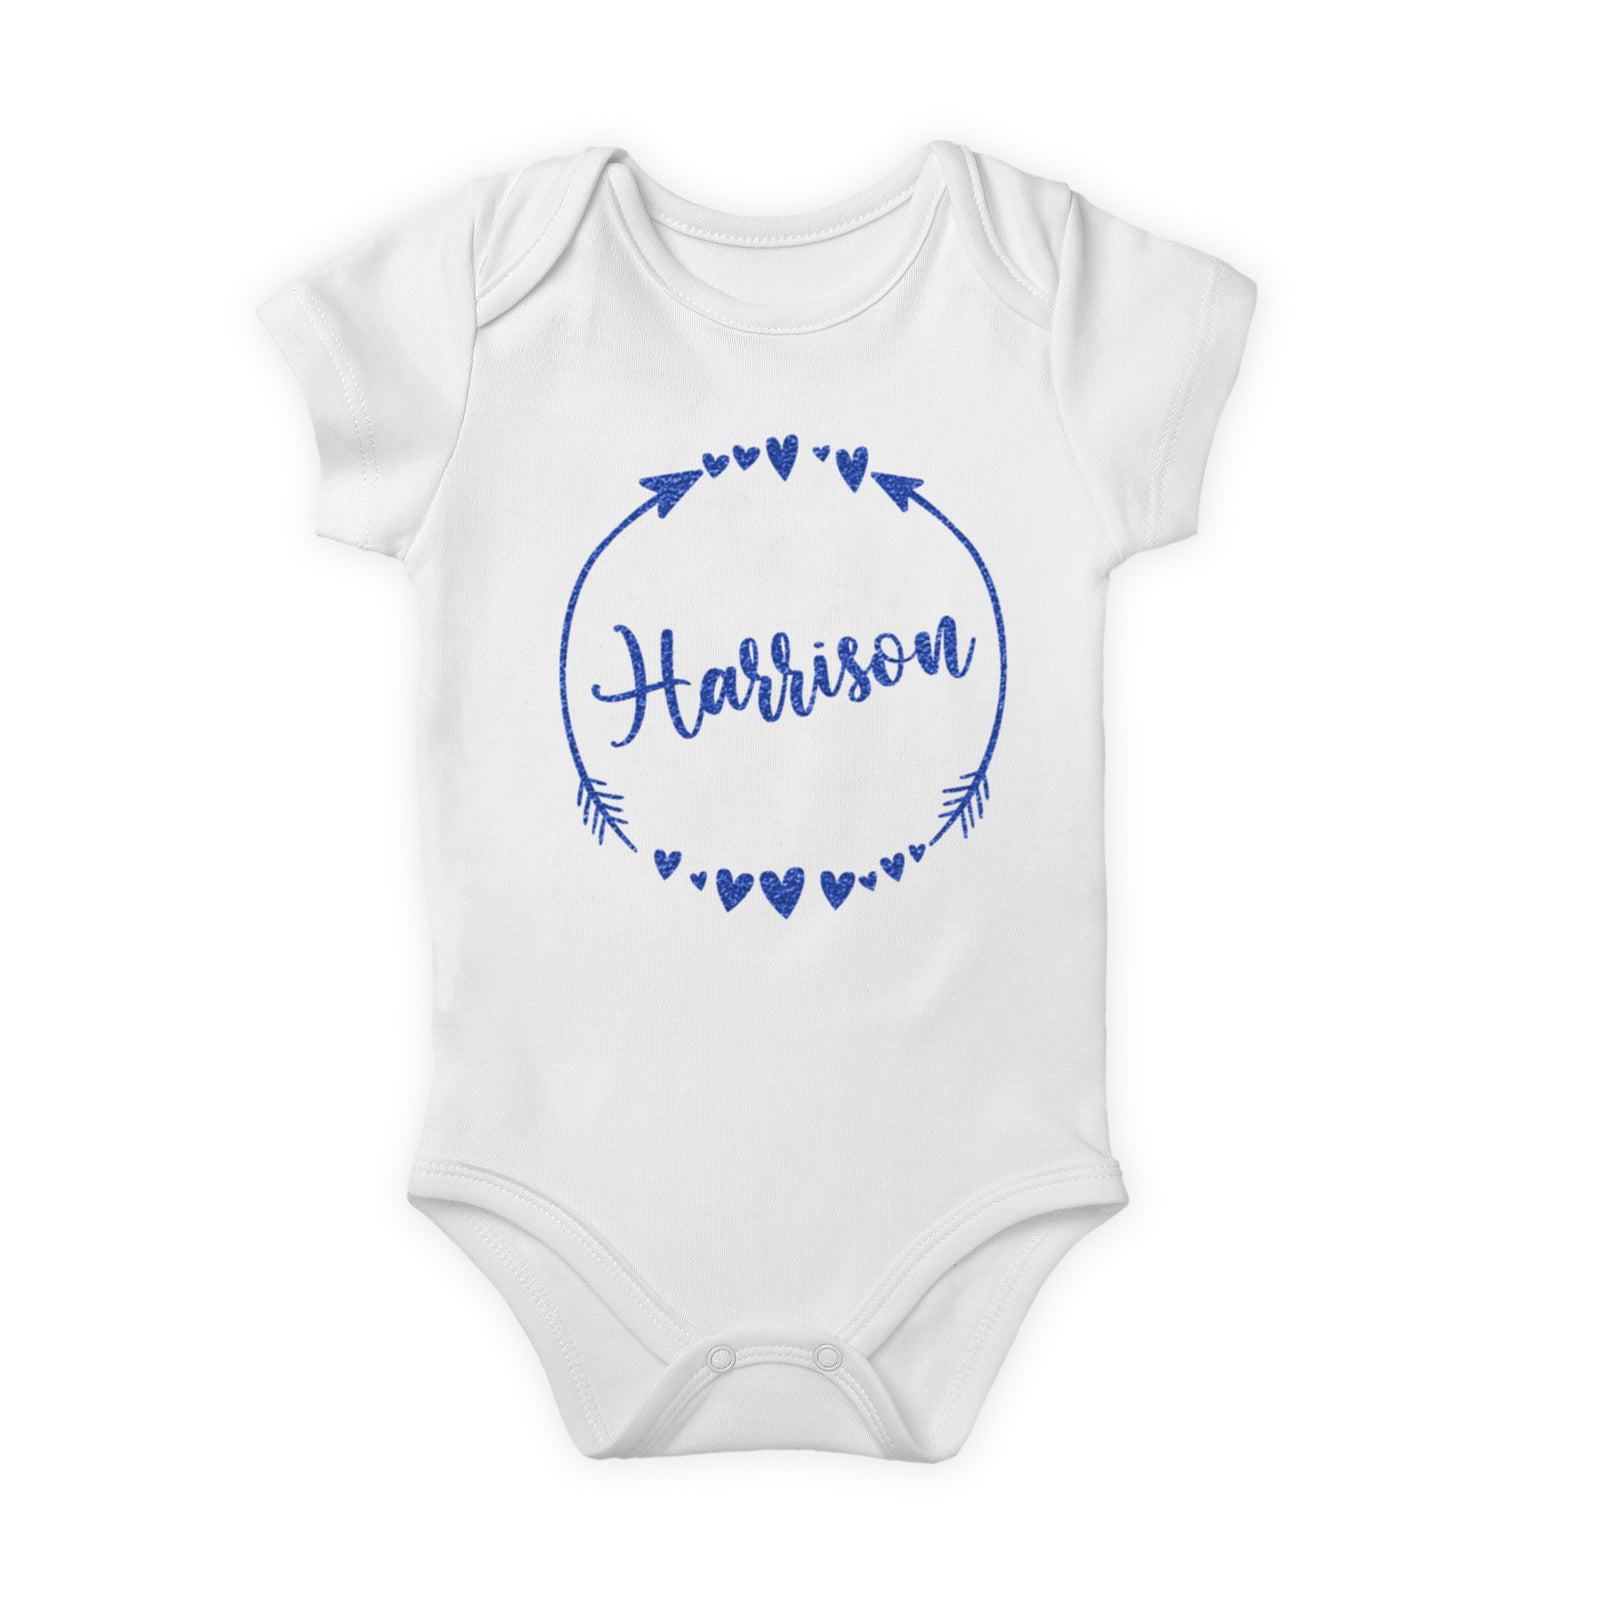 Personalised Heart Of Hearts Bodysuit